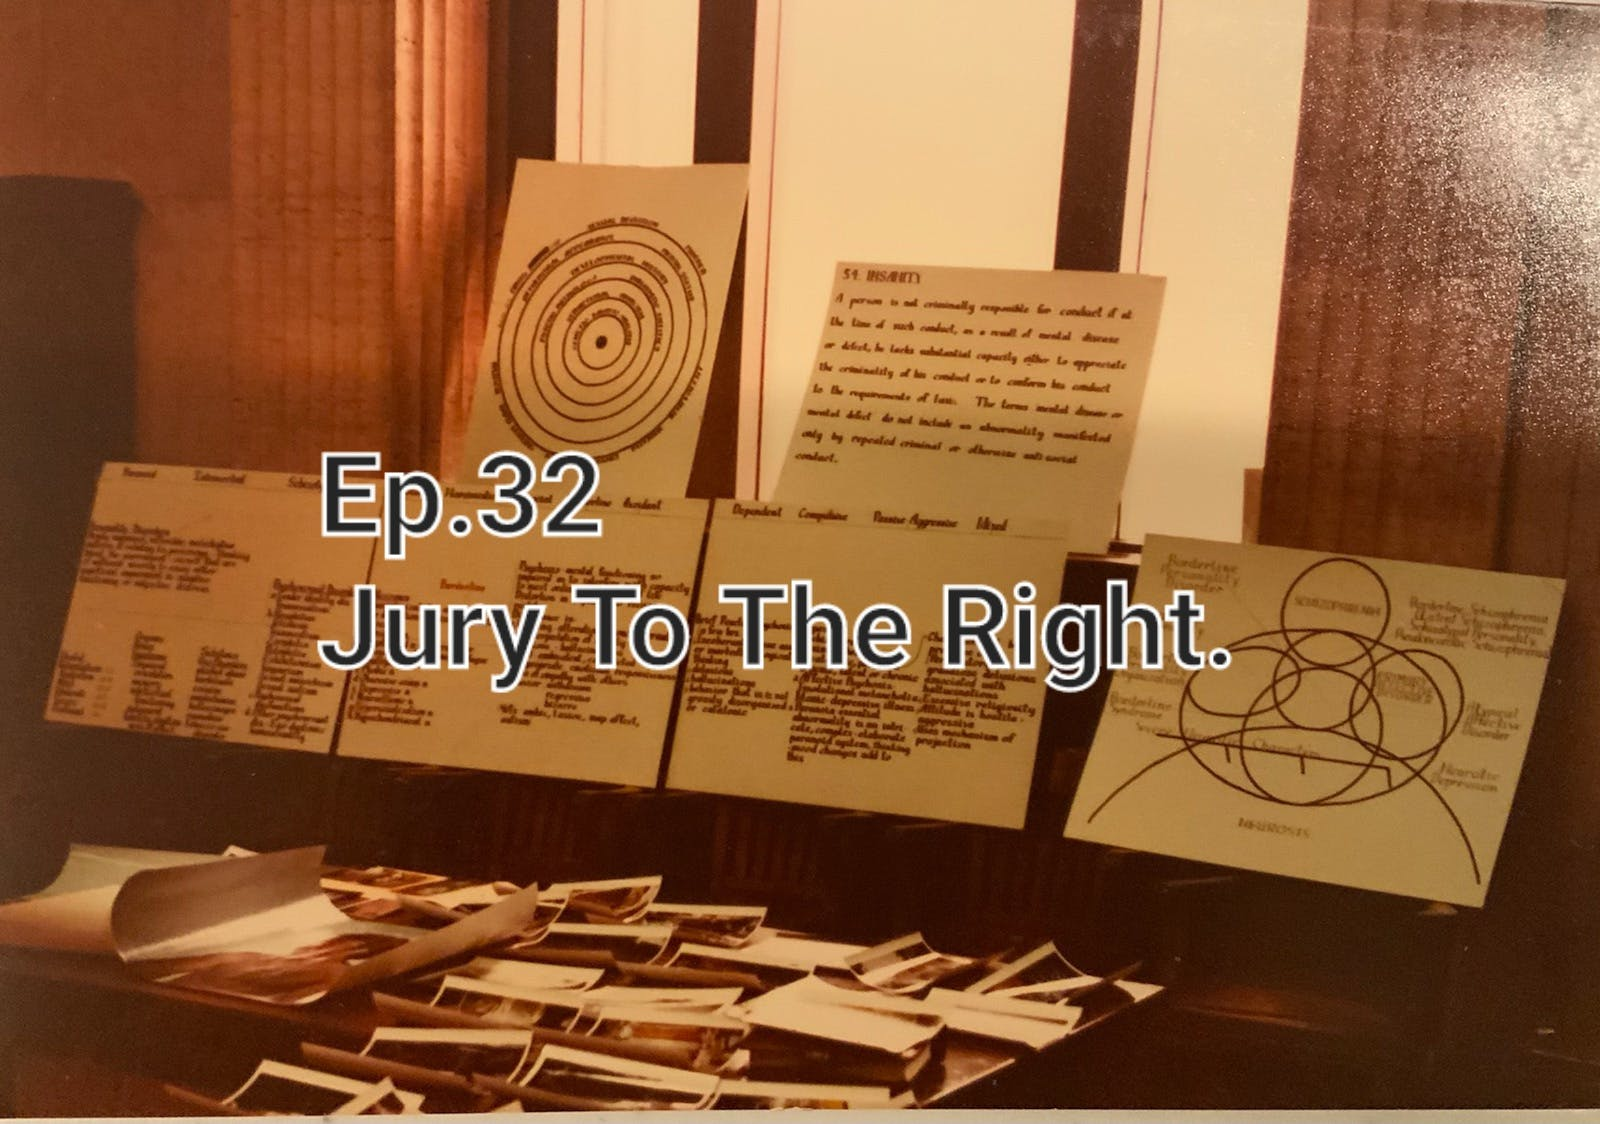 Jury To The Right